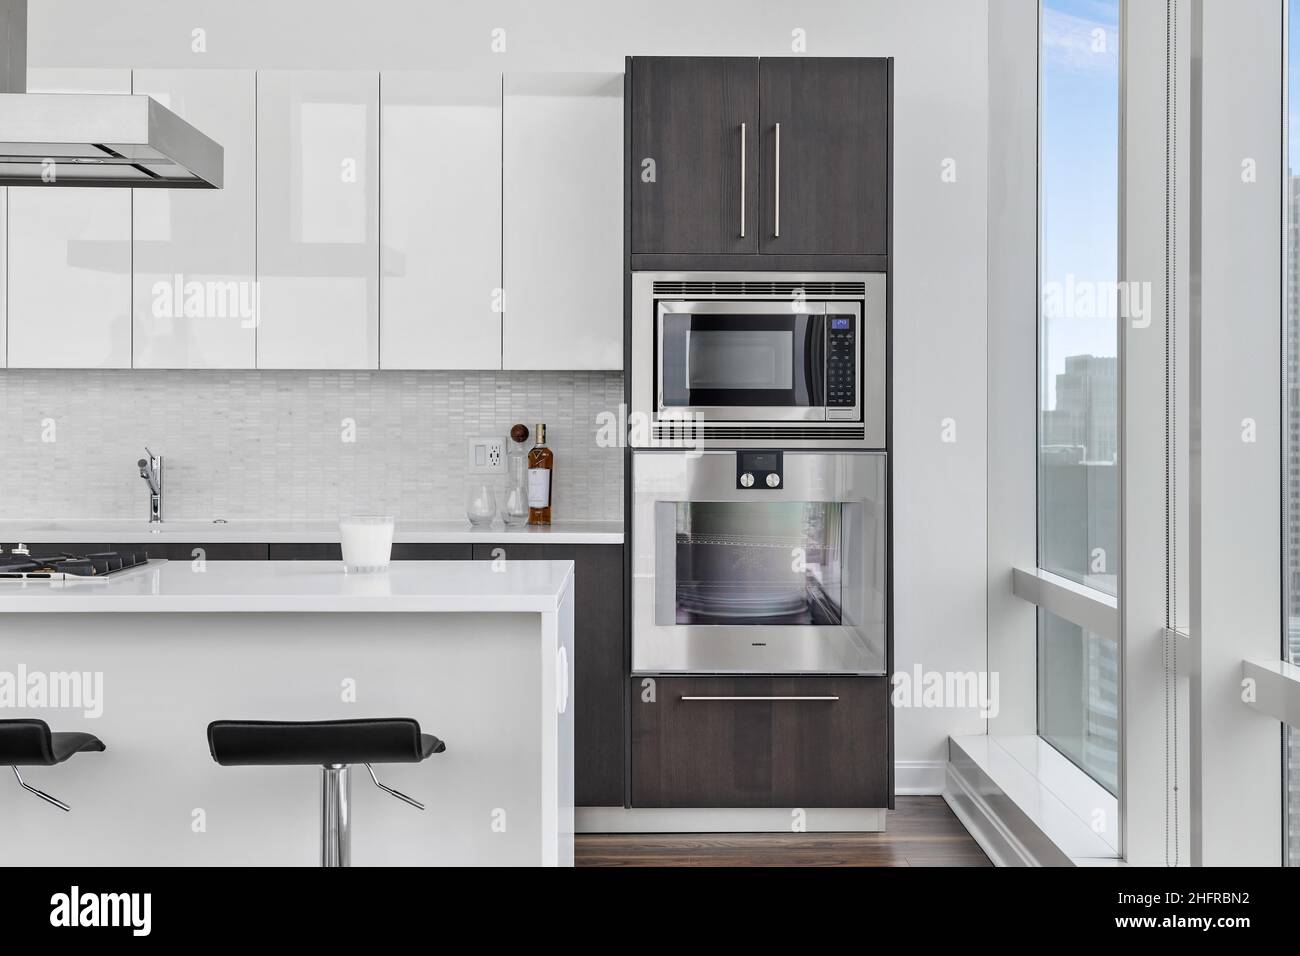 Luxury Penthouse Kitchen with City Views. Two Toned Cabinets with Waterfall Island and Stainless Steel Appliances. Modern and Contemporary Design. Stock Photo